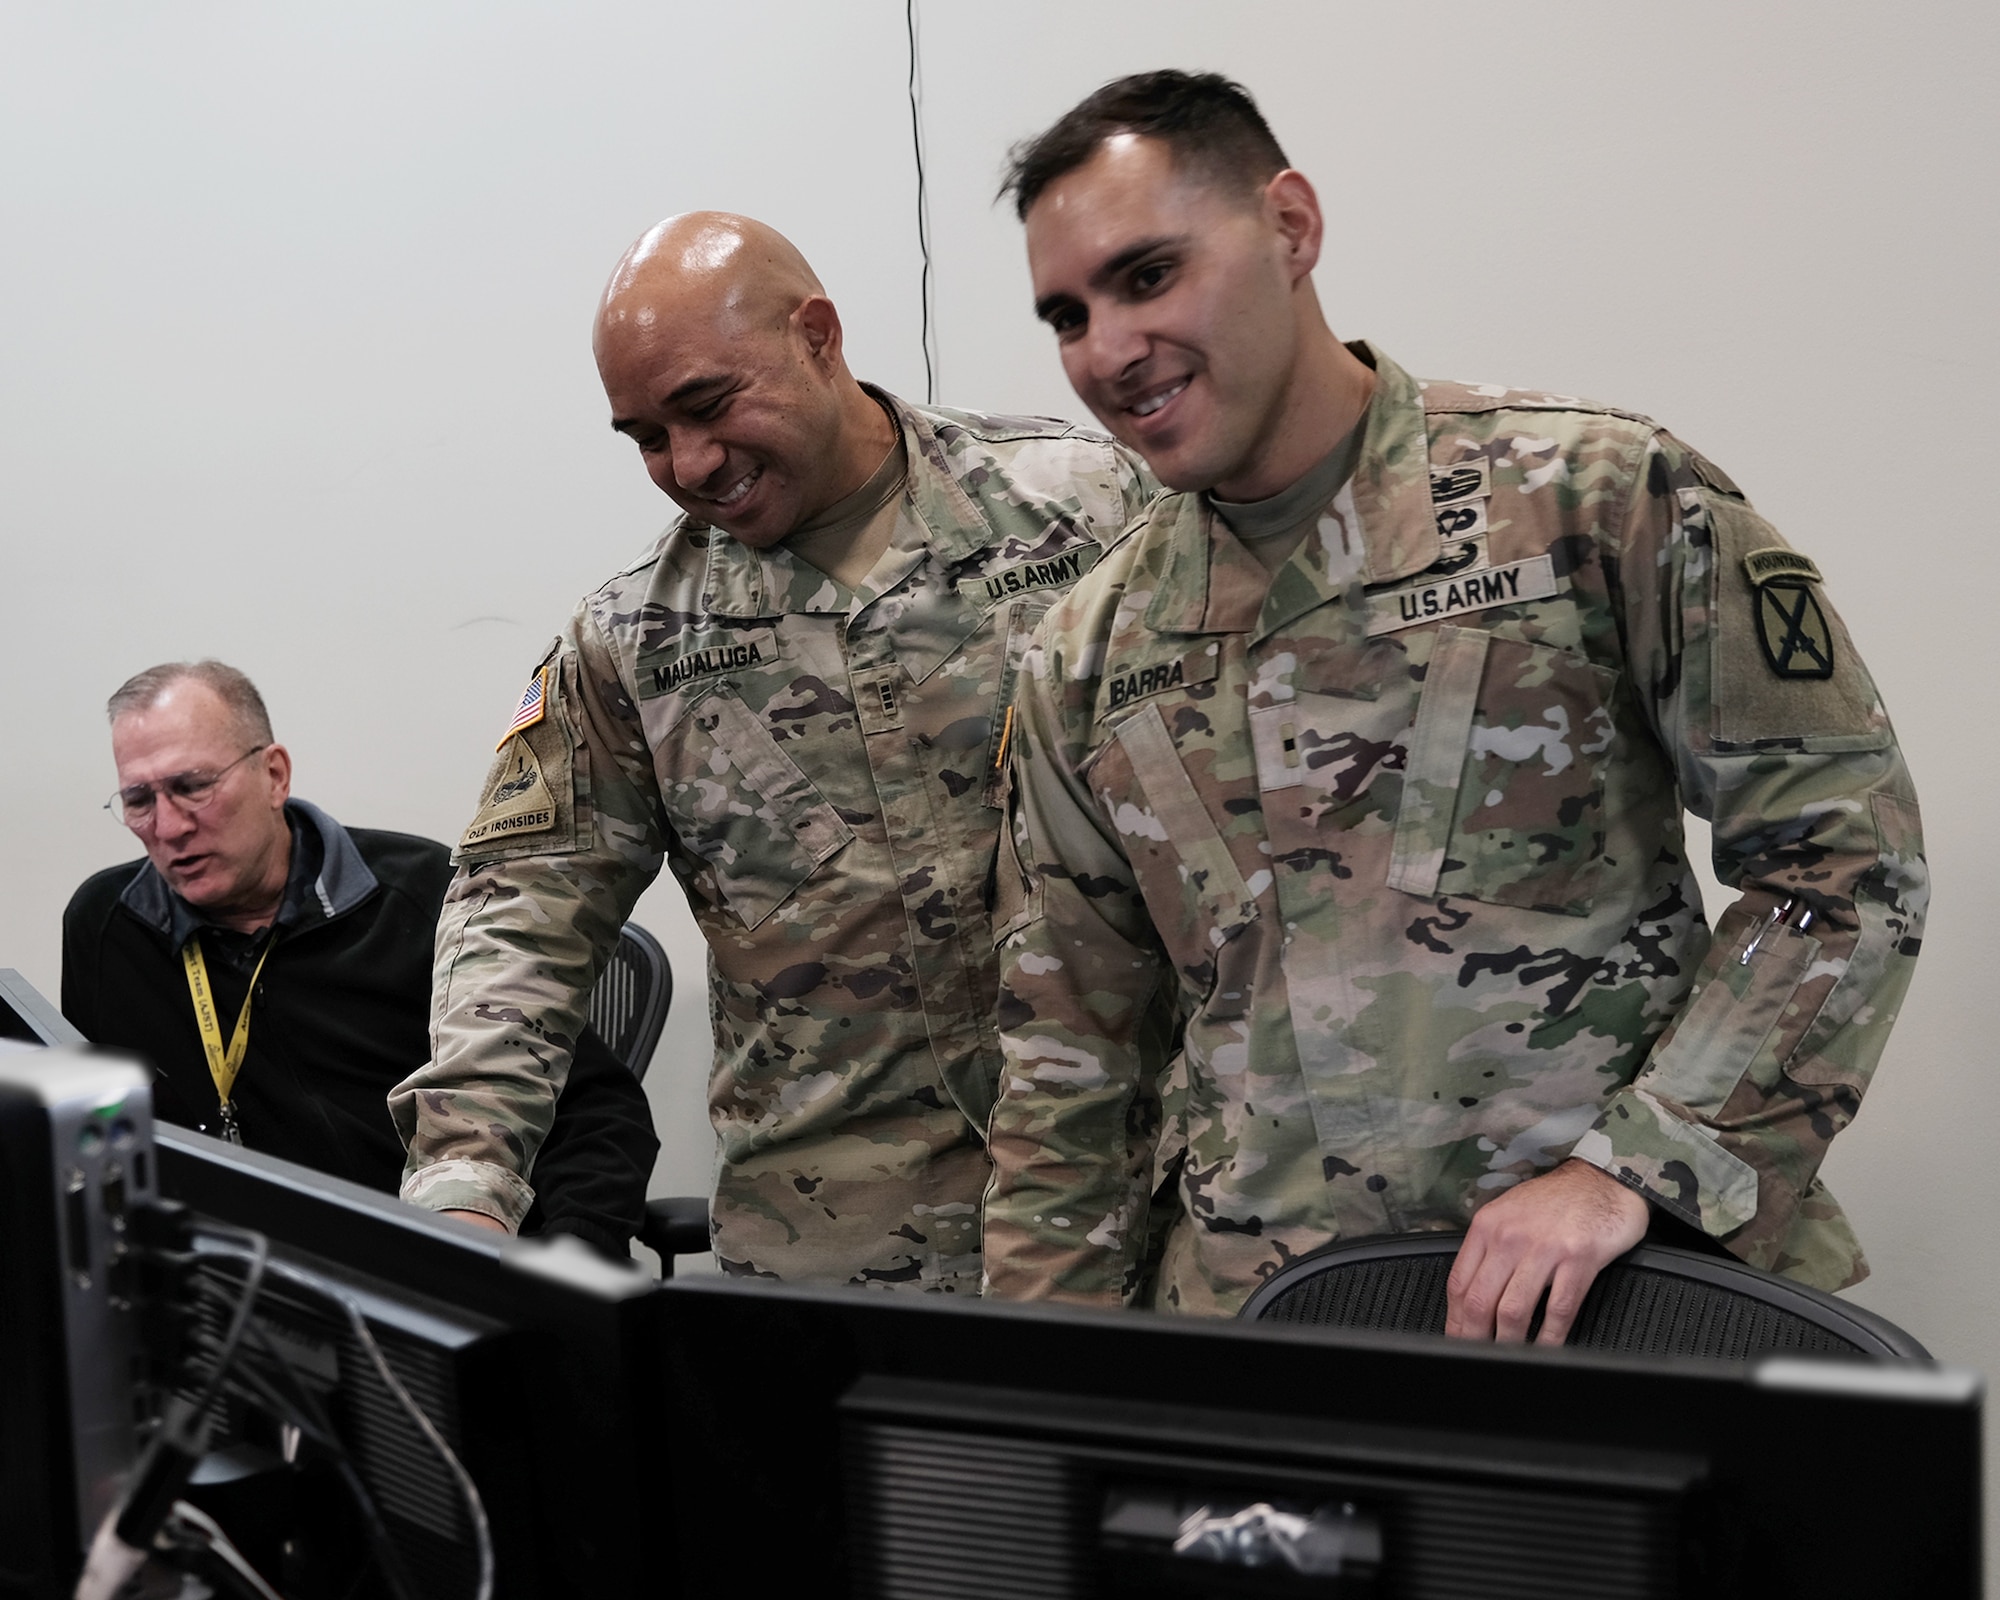 two military members nd a civilian work in an office environment on computers.